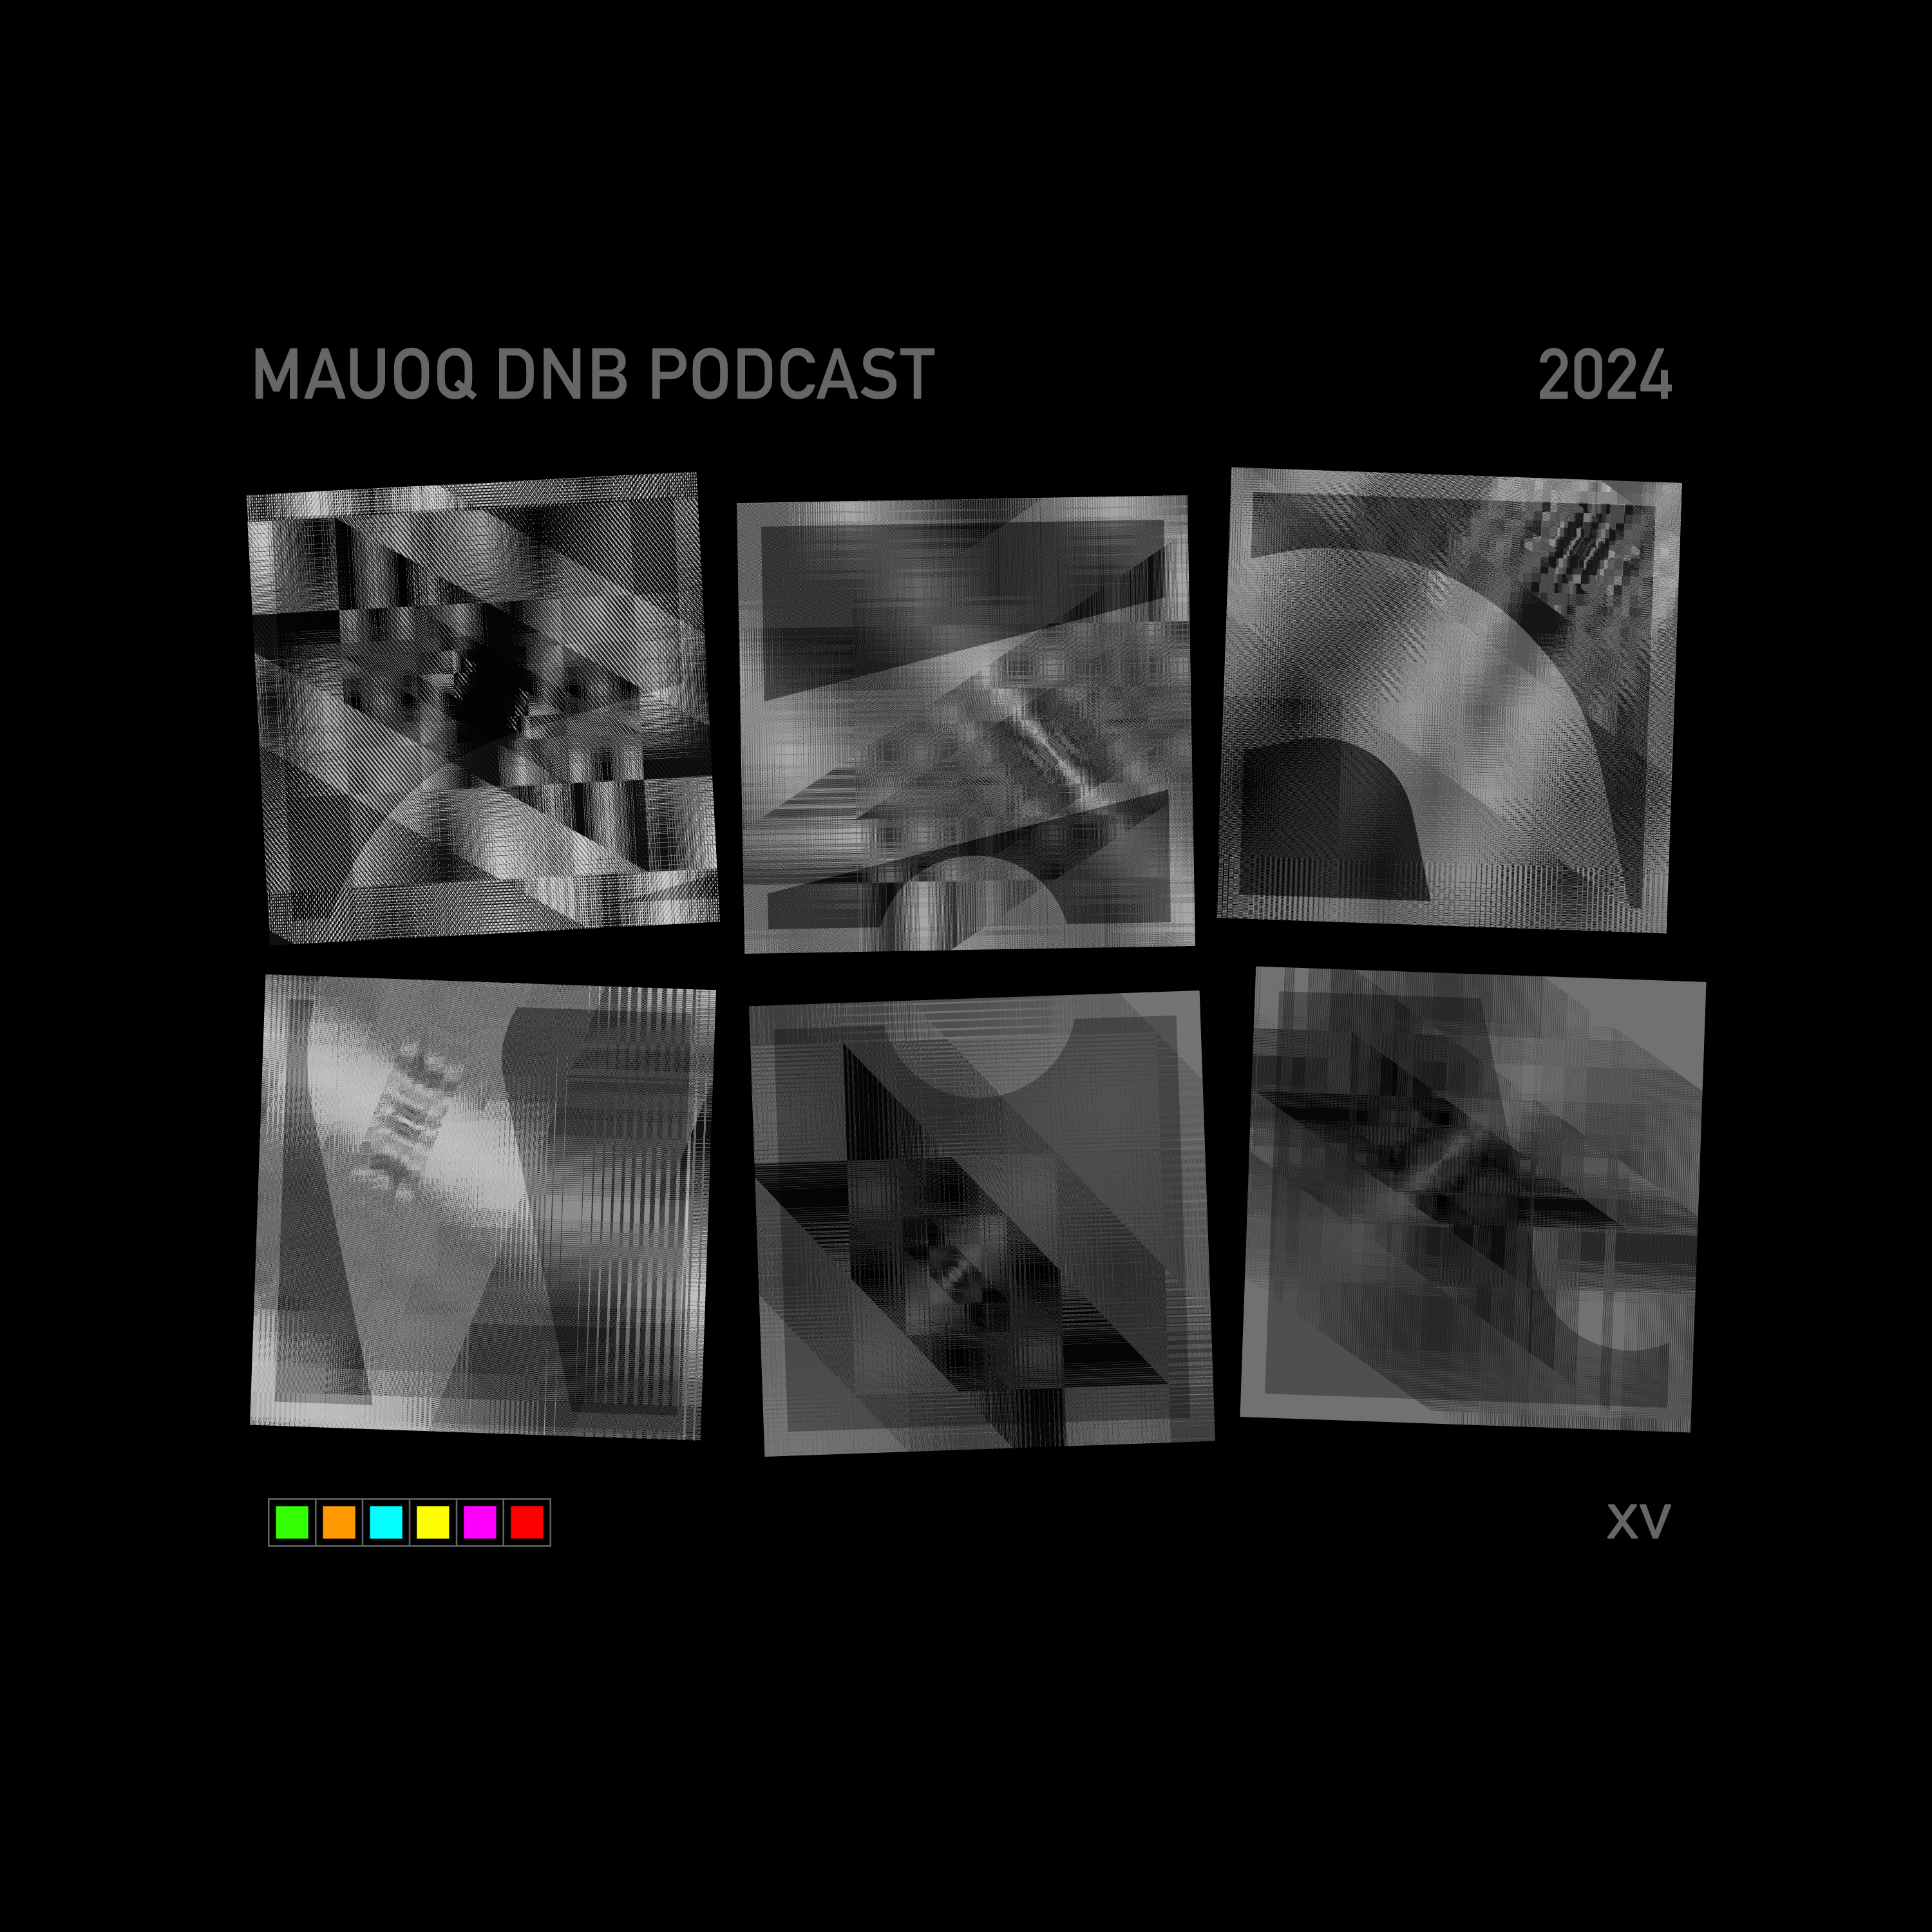 Mauoq DnB Podcast Cover